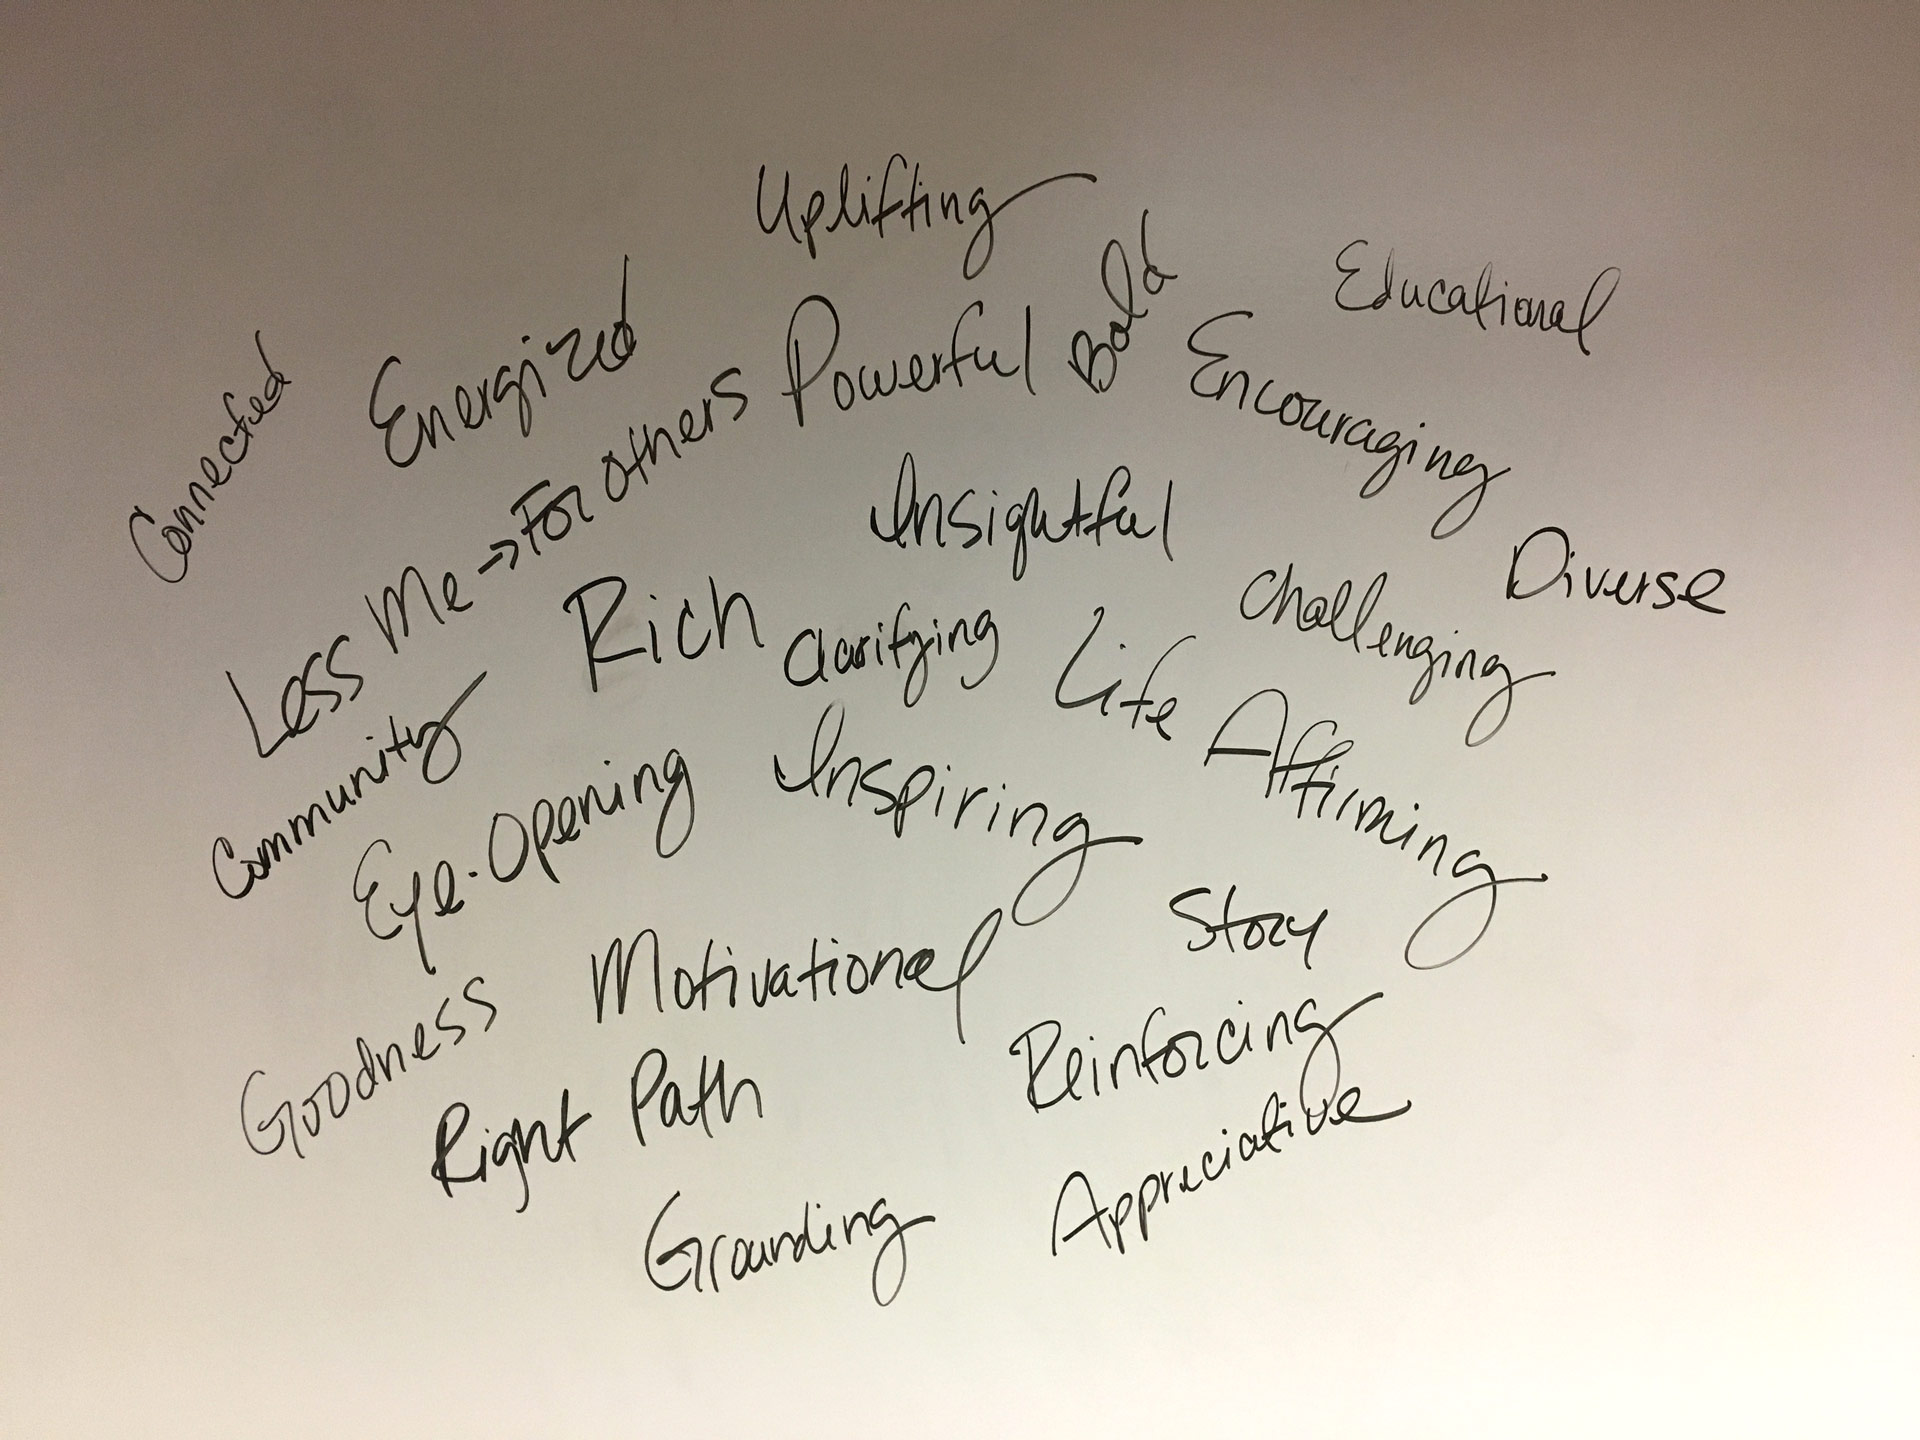 Hand written words on a whiteboard used to create the Berry Wehmiller Leadership Institute brand language